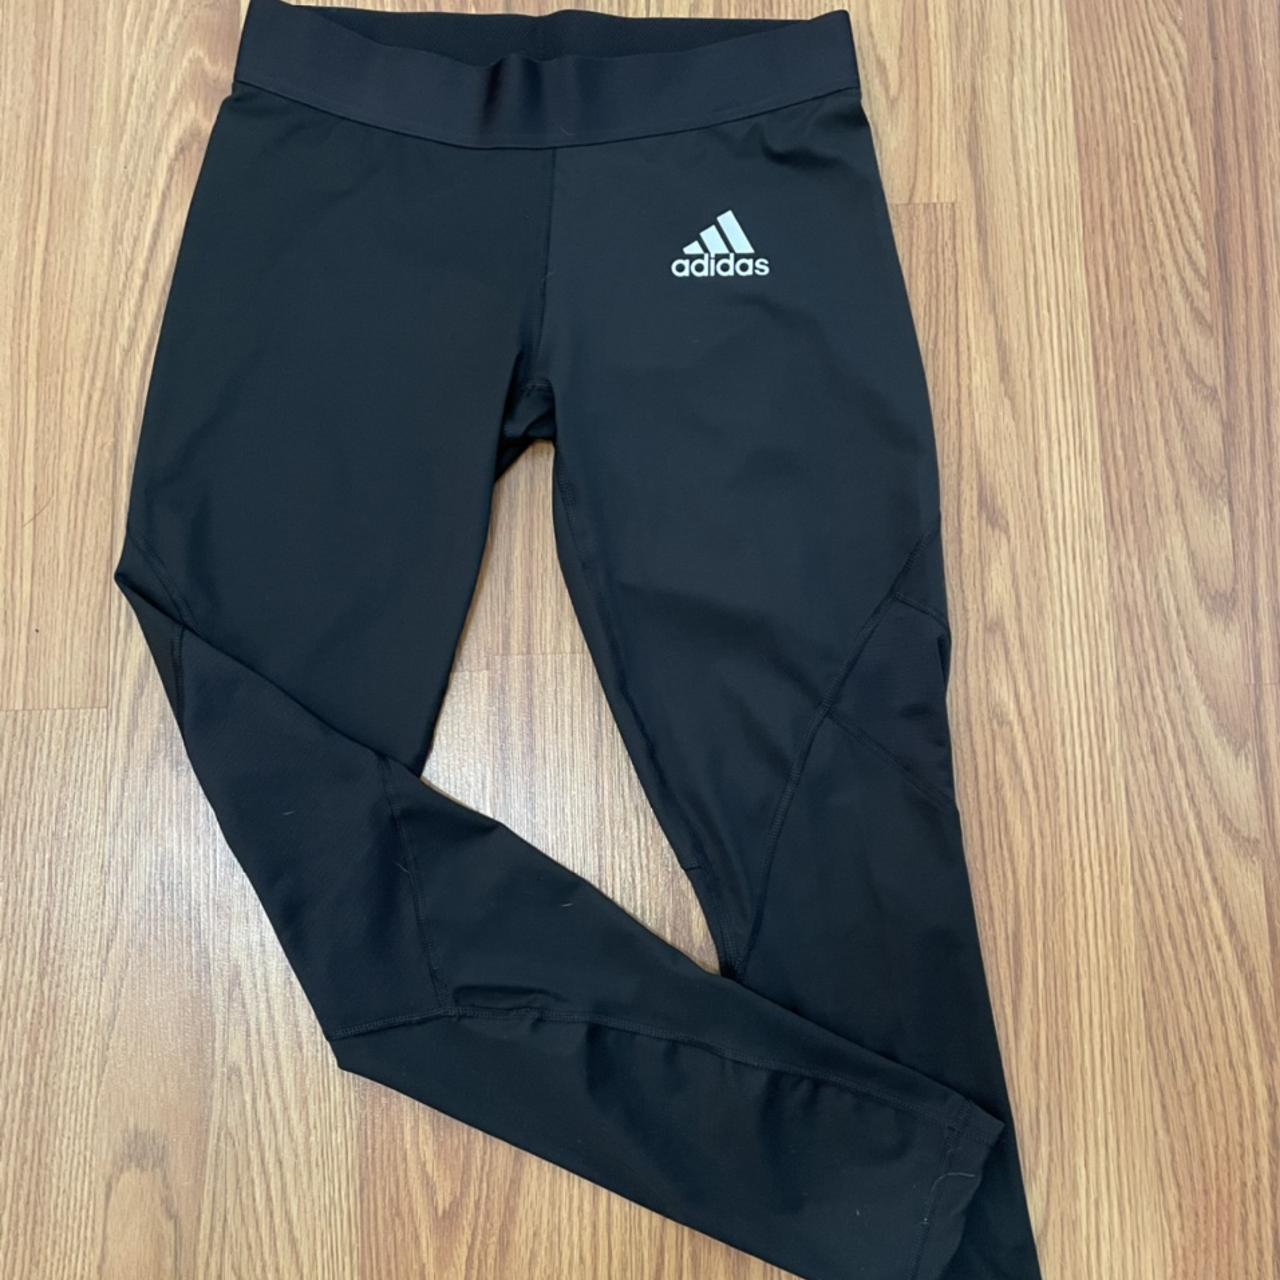 Adidas alpha skin black workout leggings. These are... - Depop